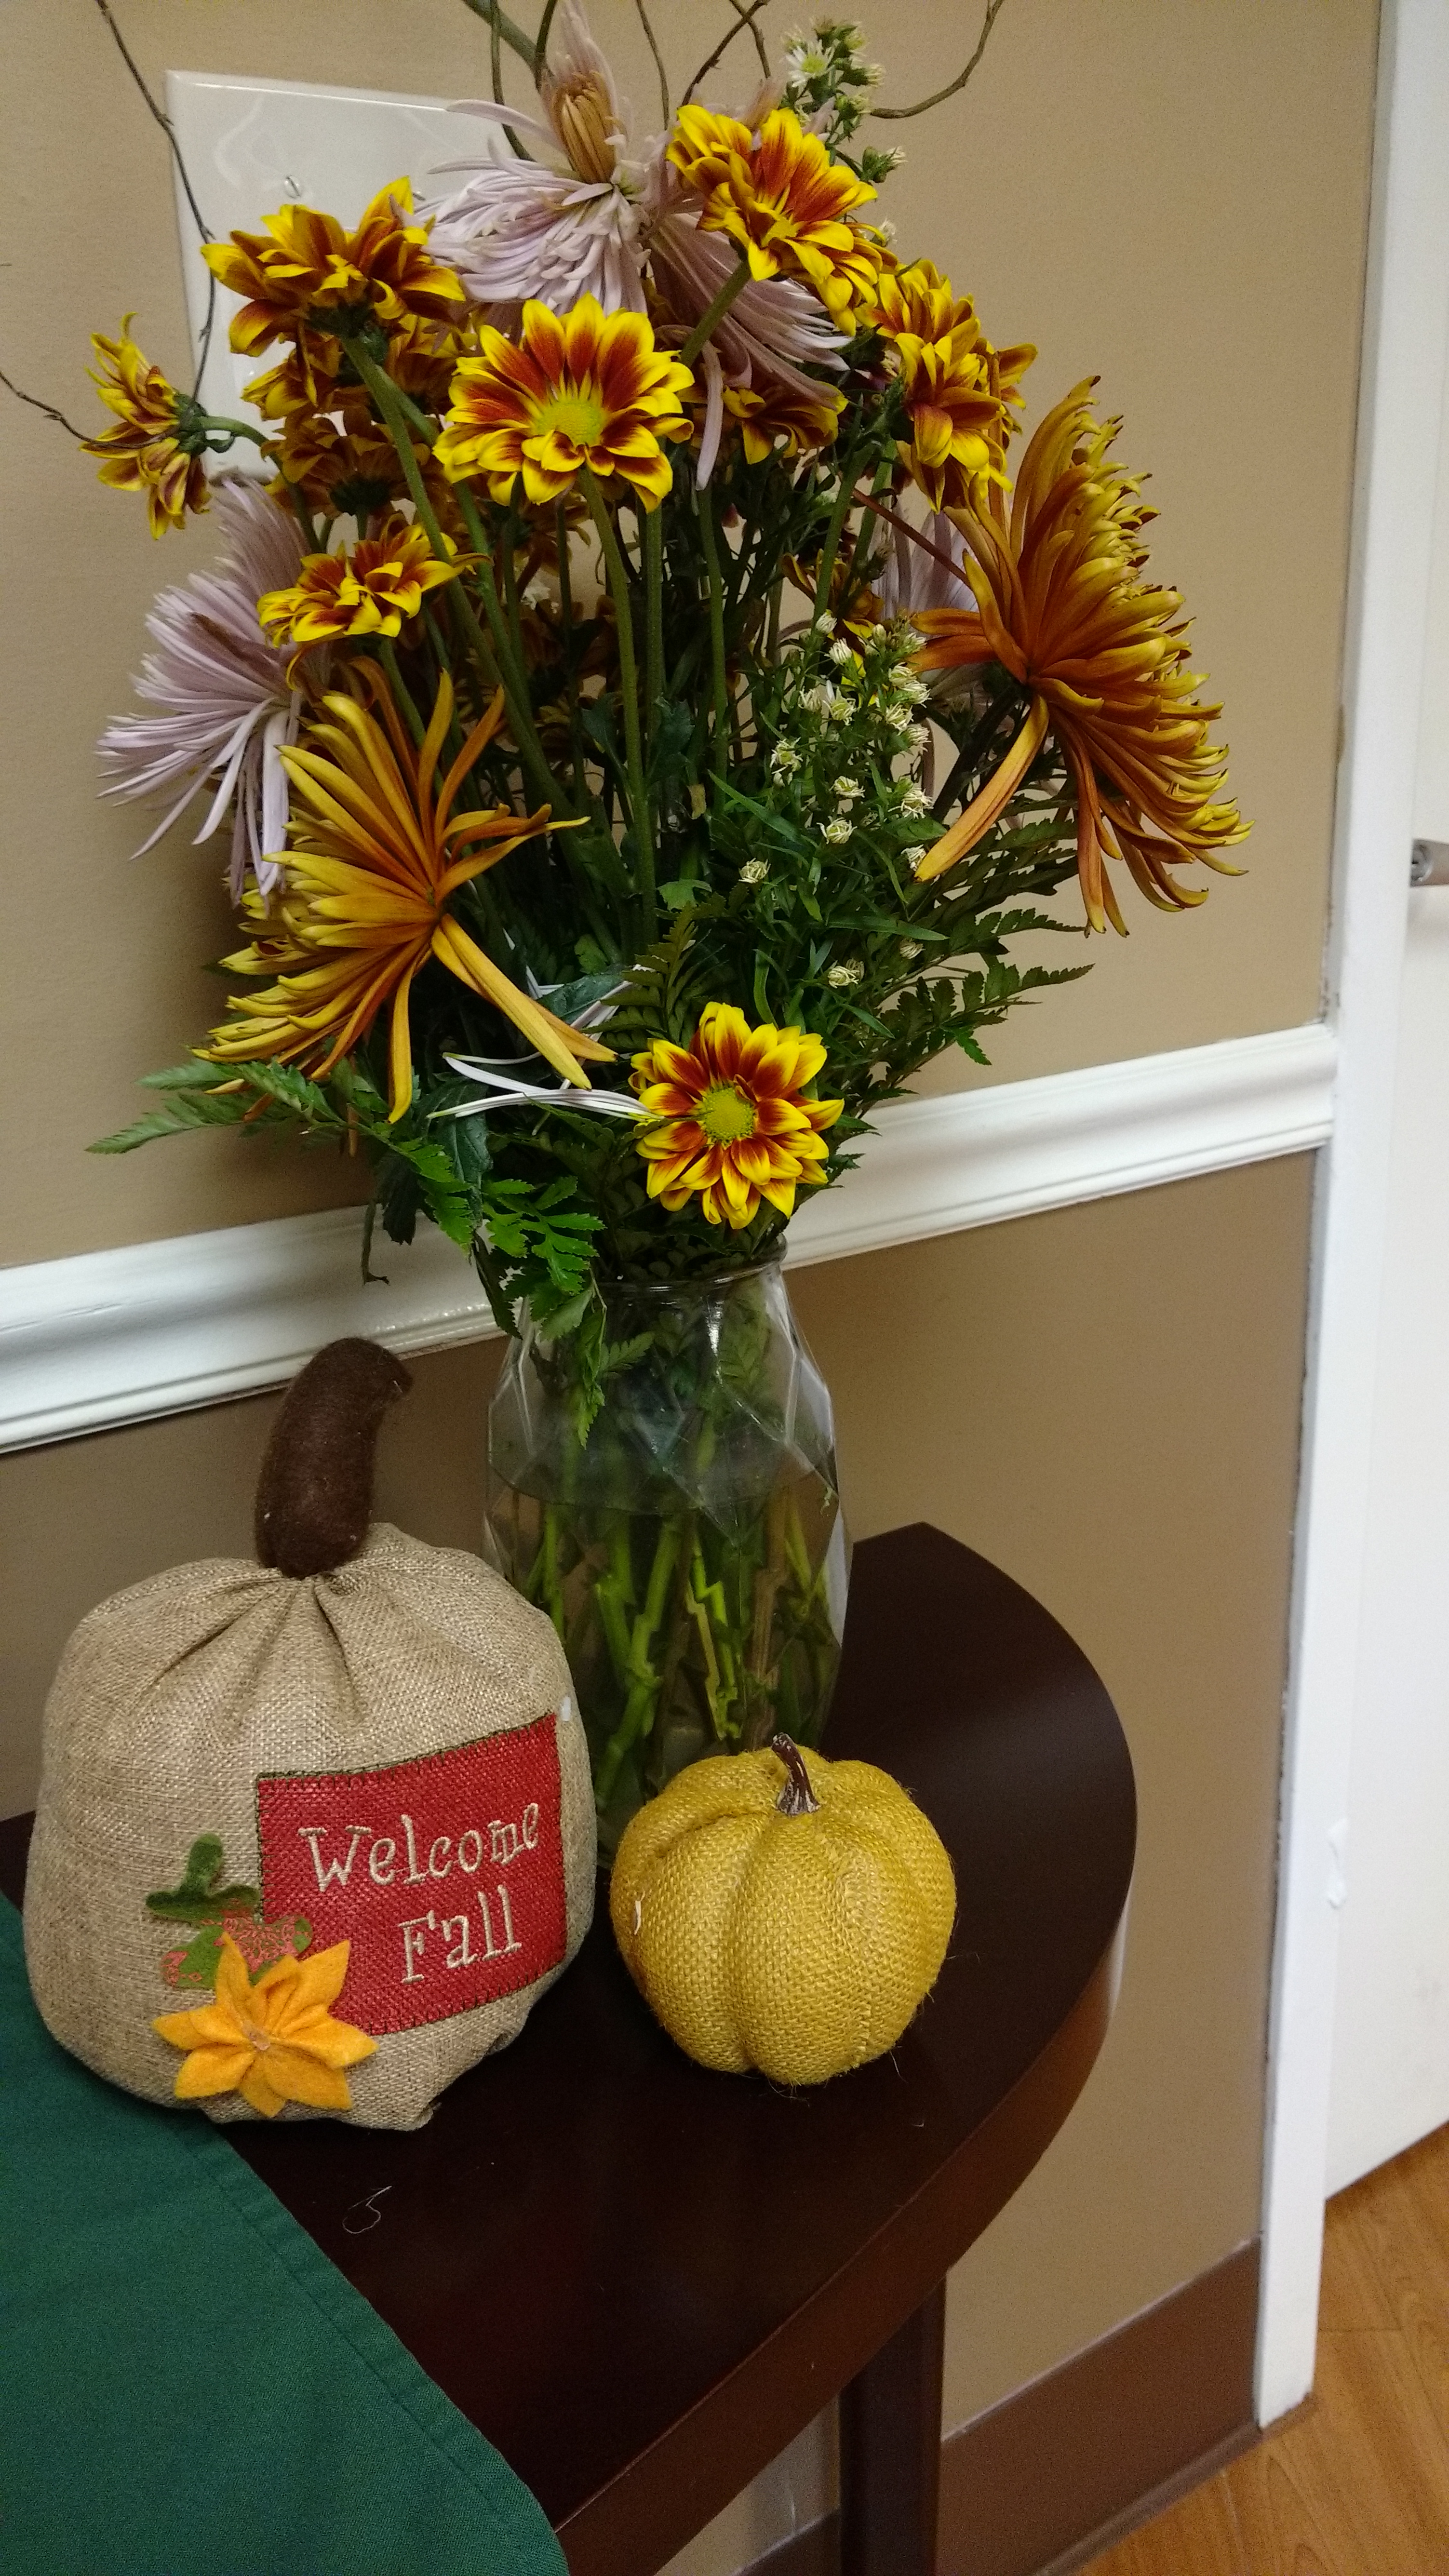 flowers in vase with Welcome fall pumpkin